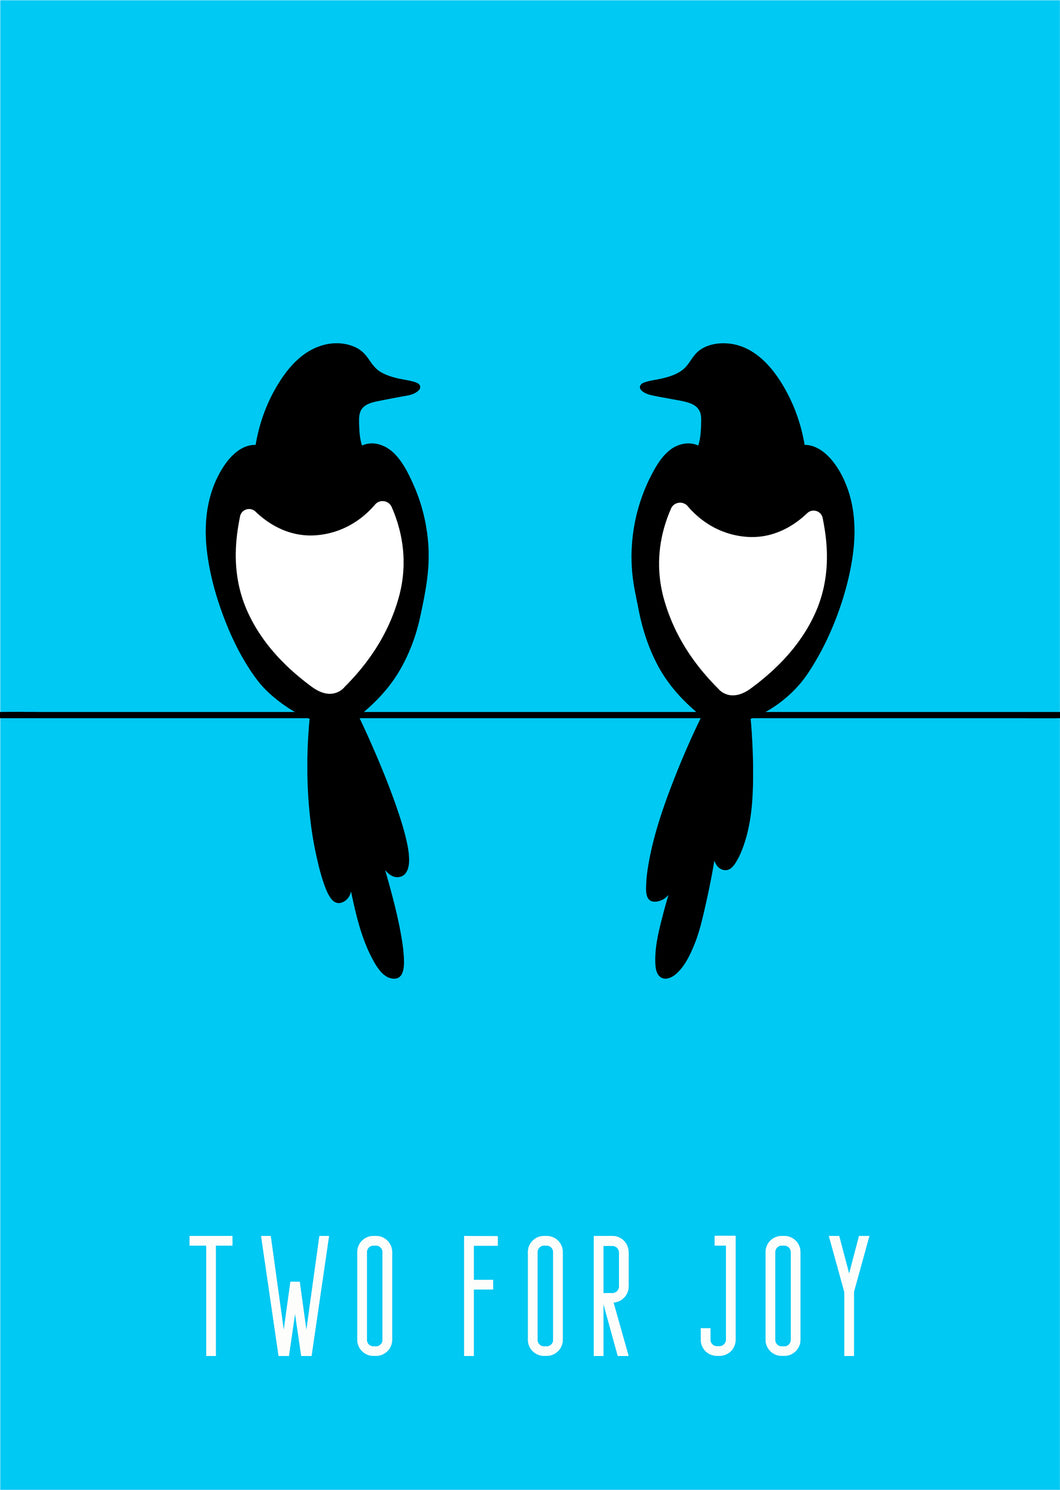 Two For Joy | Print